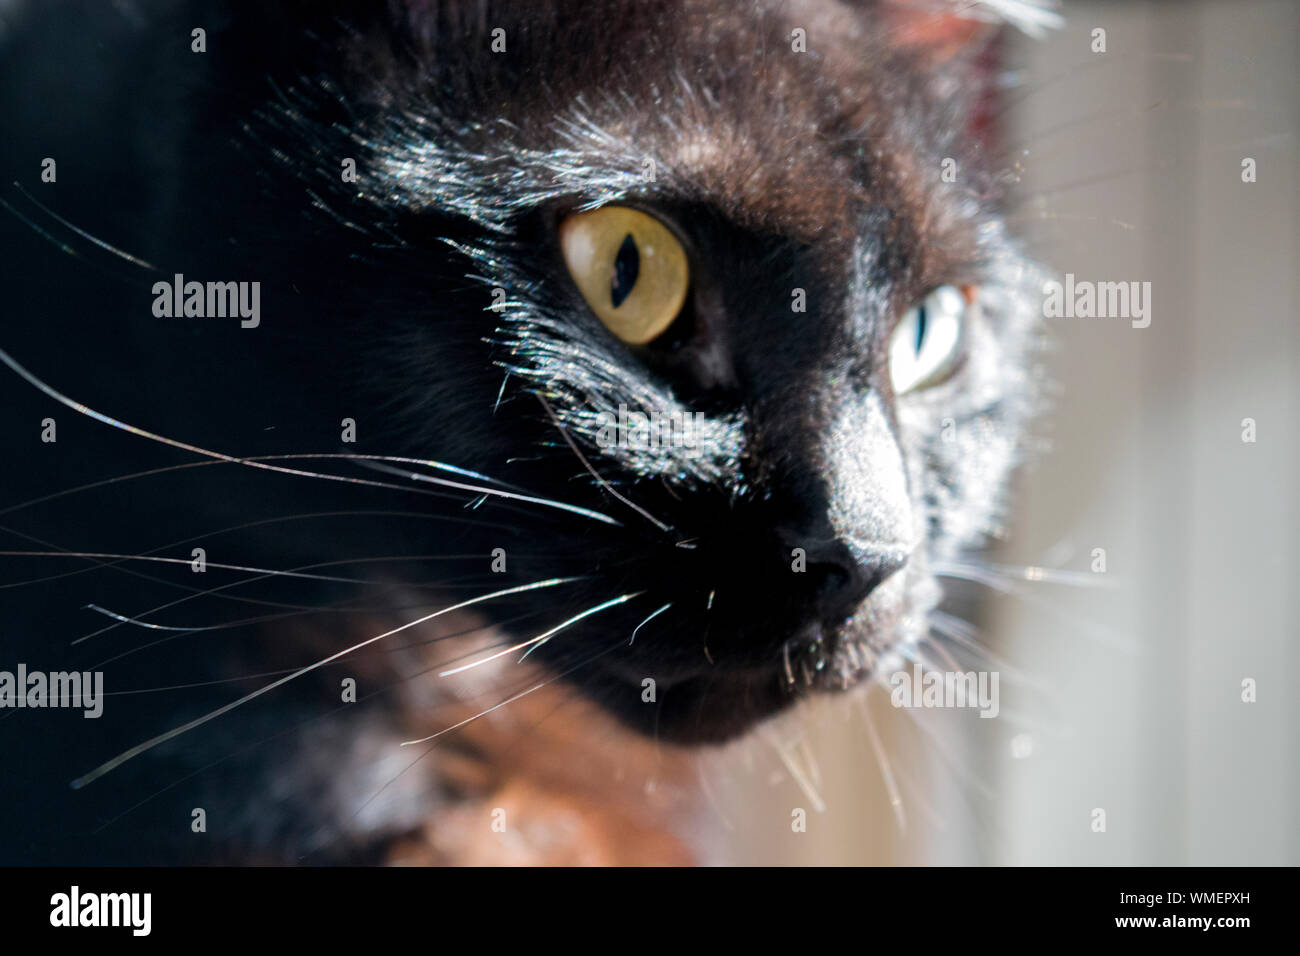 Puss, the most interactive black cat in the world, staring. Stock Photo